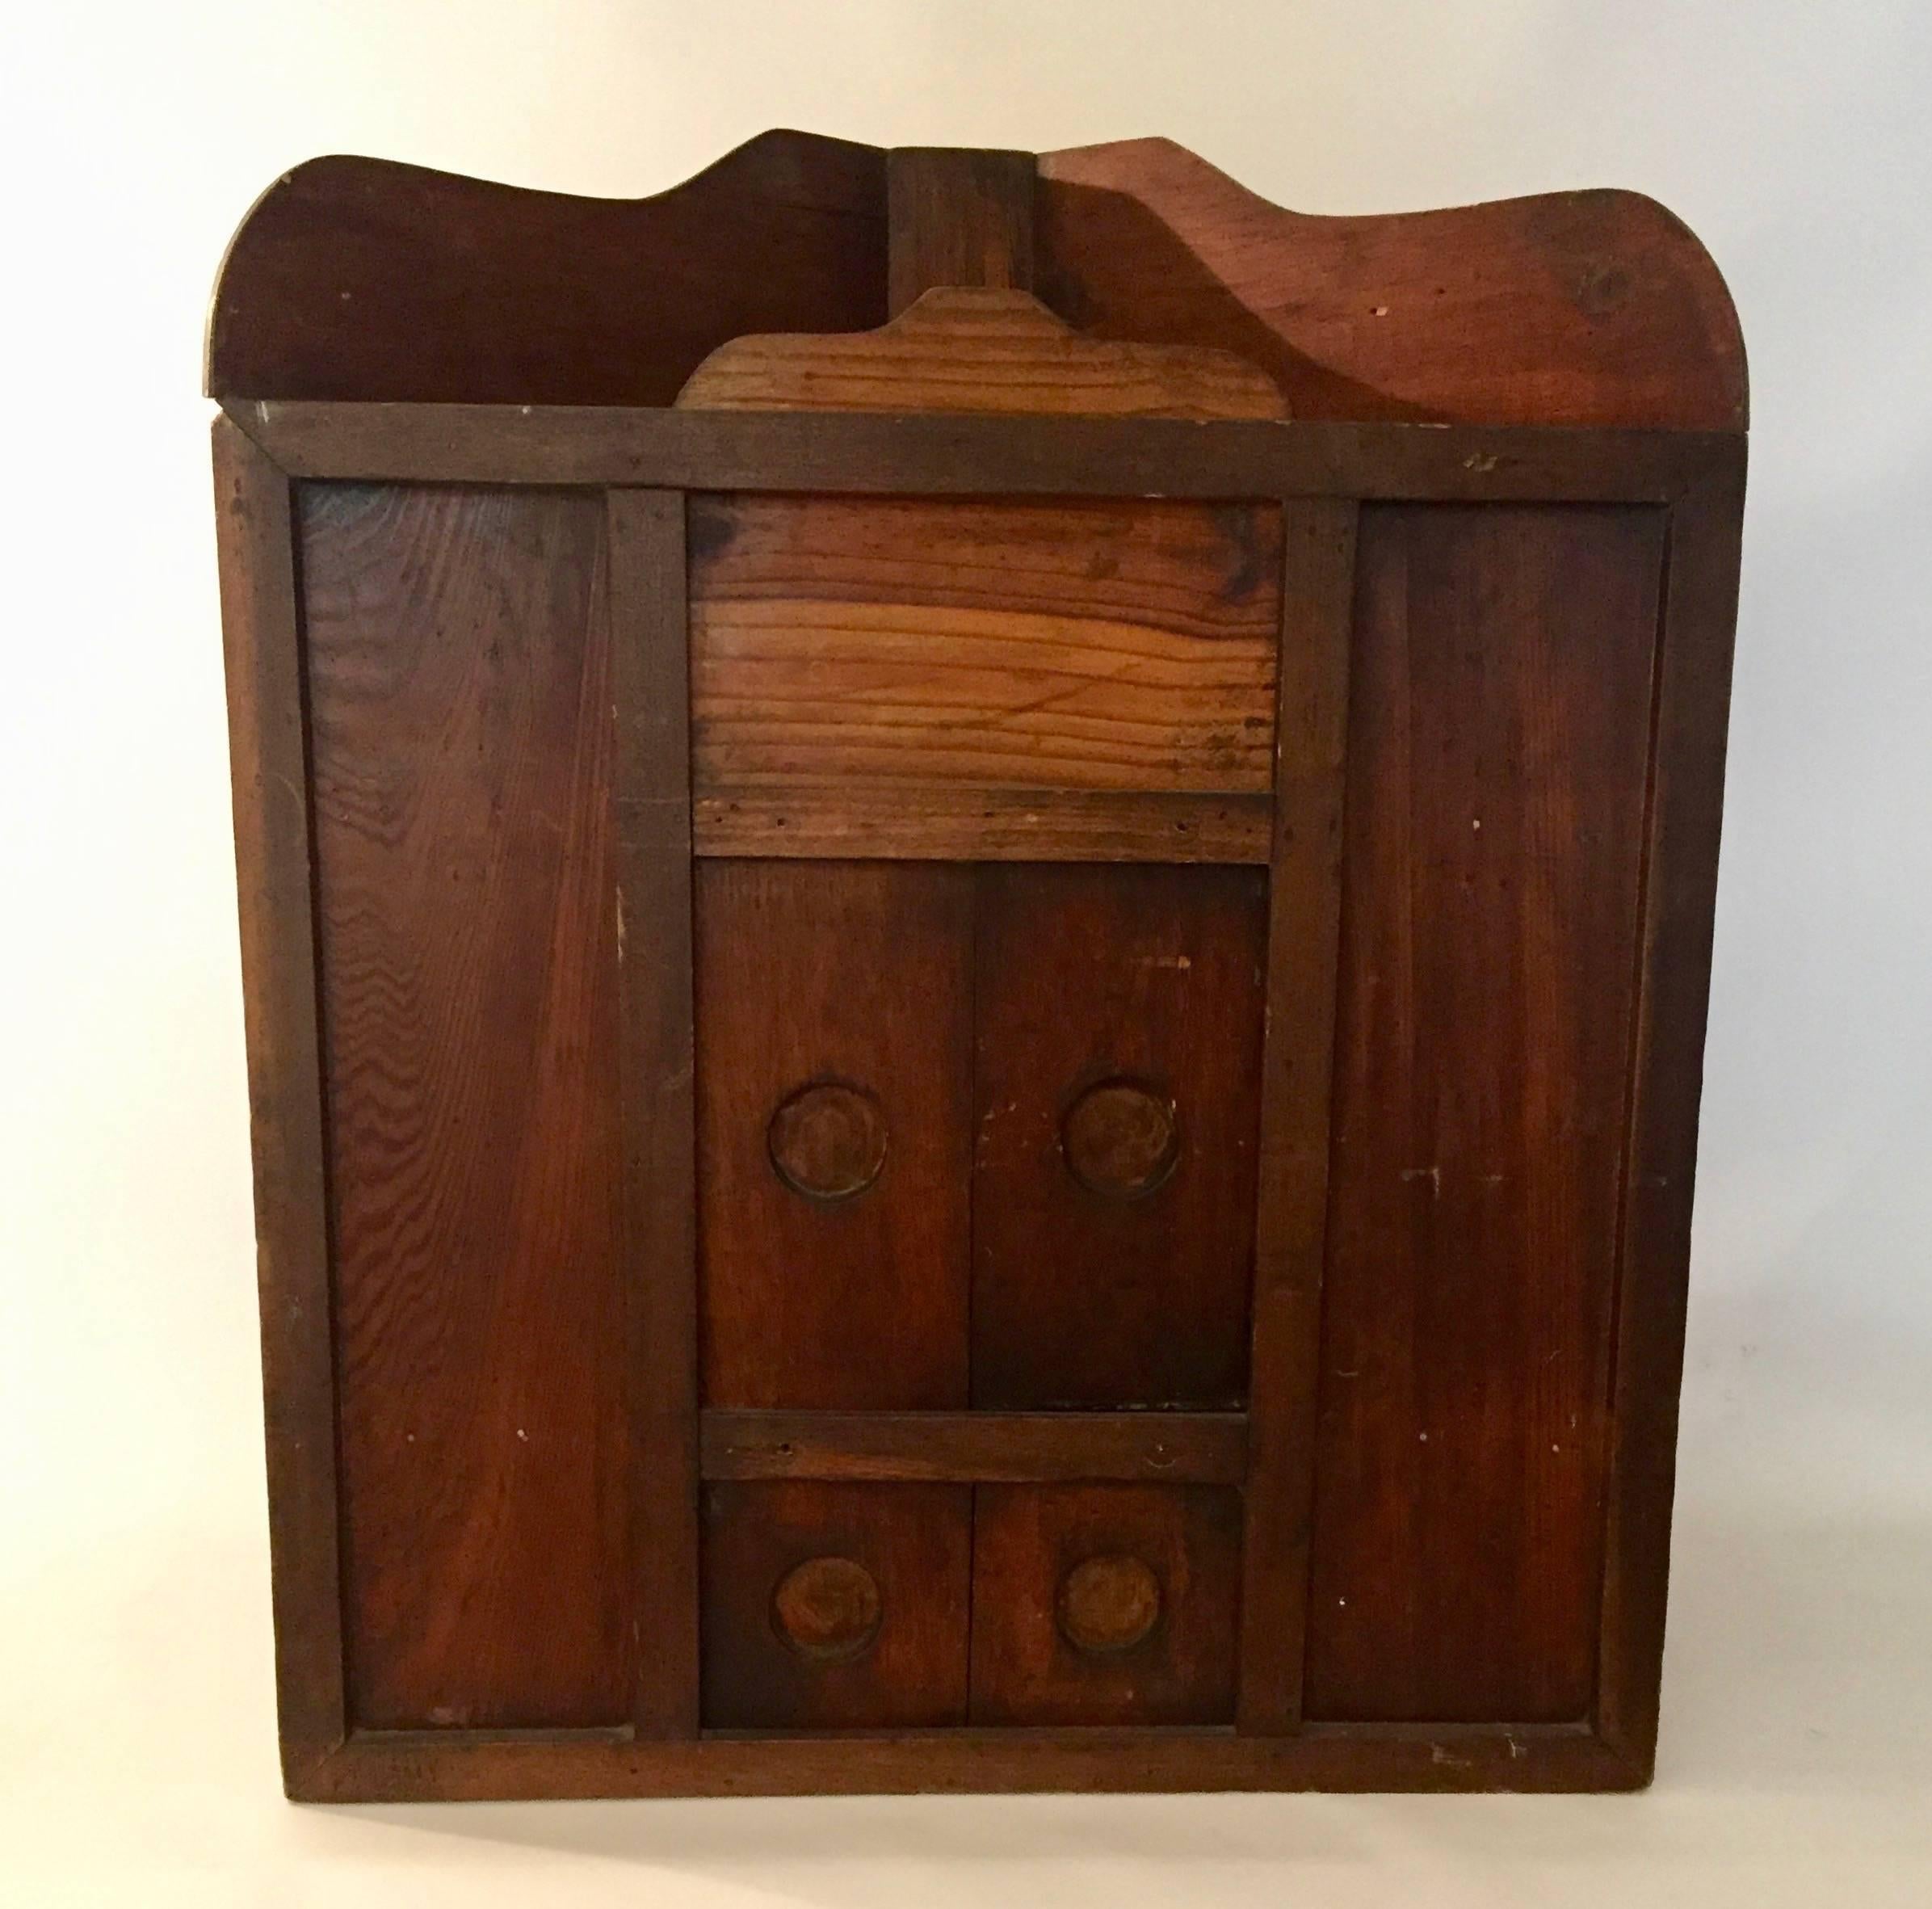 Handmade 19th century pine primitive corner cabinet. It's a bit of an oddity possibly meant to obscure precious items. There is a trick to opening the doors. The two sets of doors almost seem spring loaded, but they are not. The doors fit into